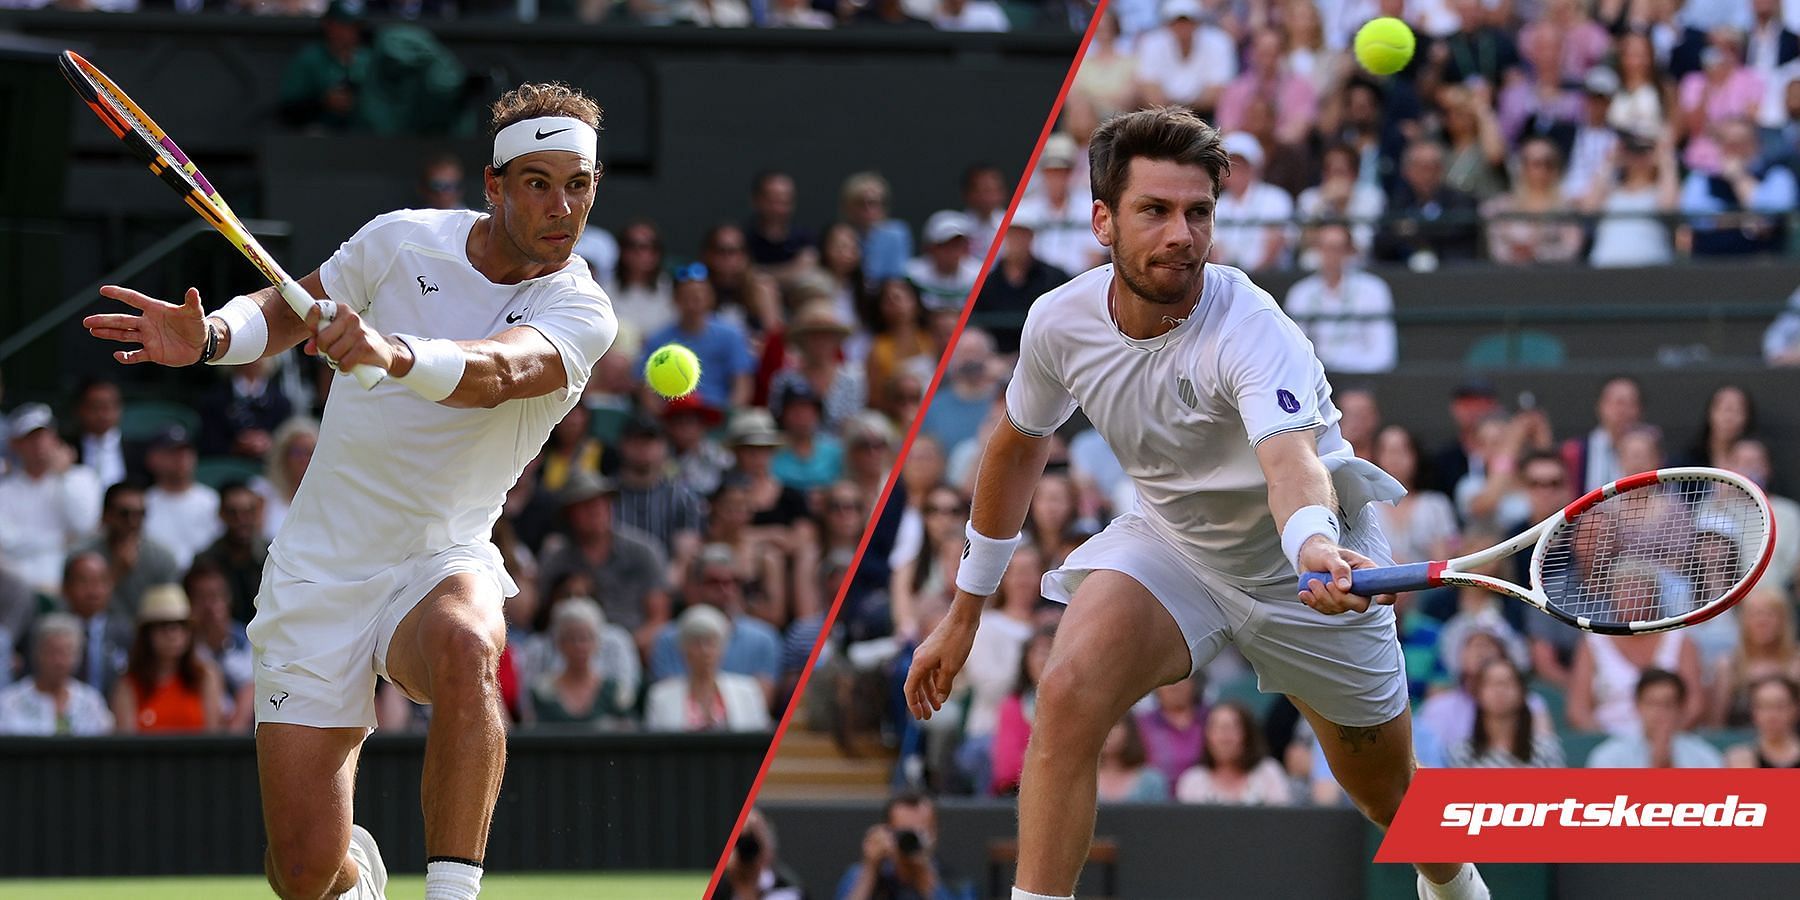 Nadal (left) and Norrie are the first pair of left-handers in 30 years to reach the Wimbledon semifinals.